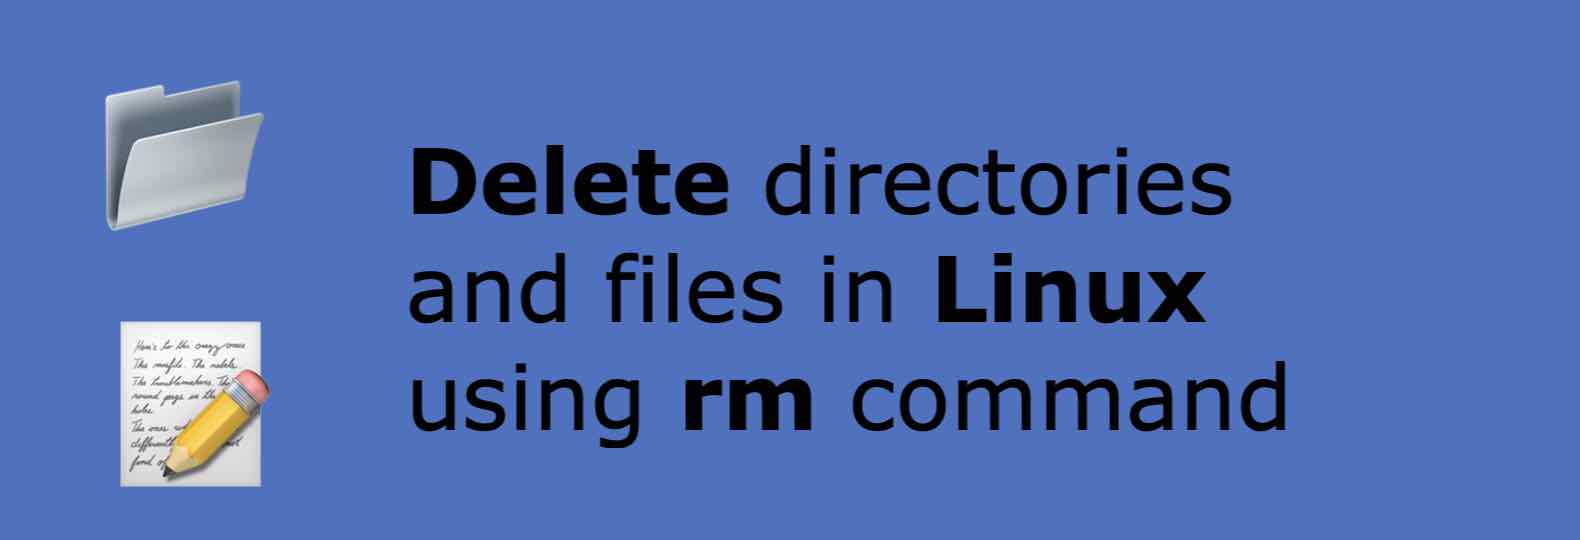 Delete files and directories in Linux